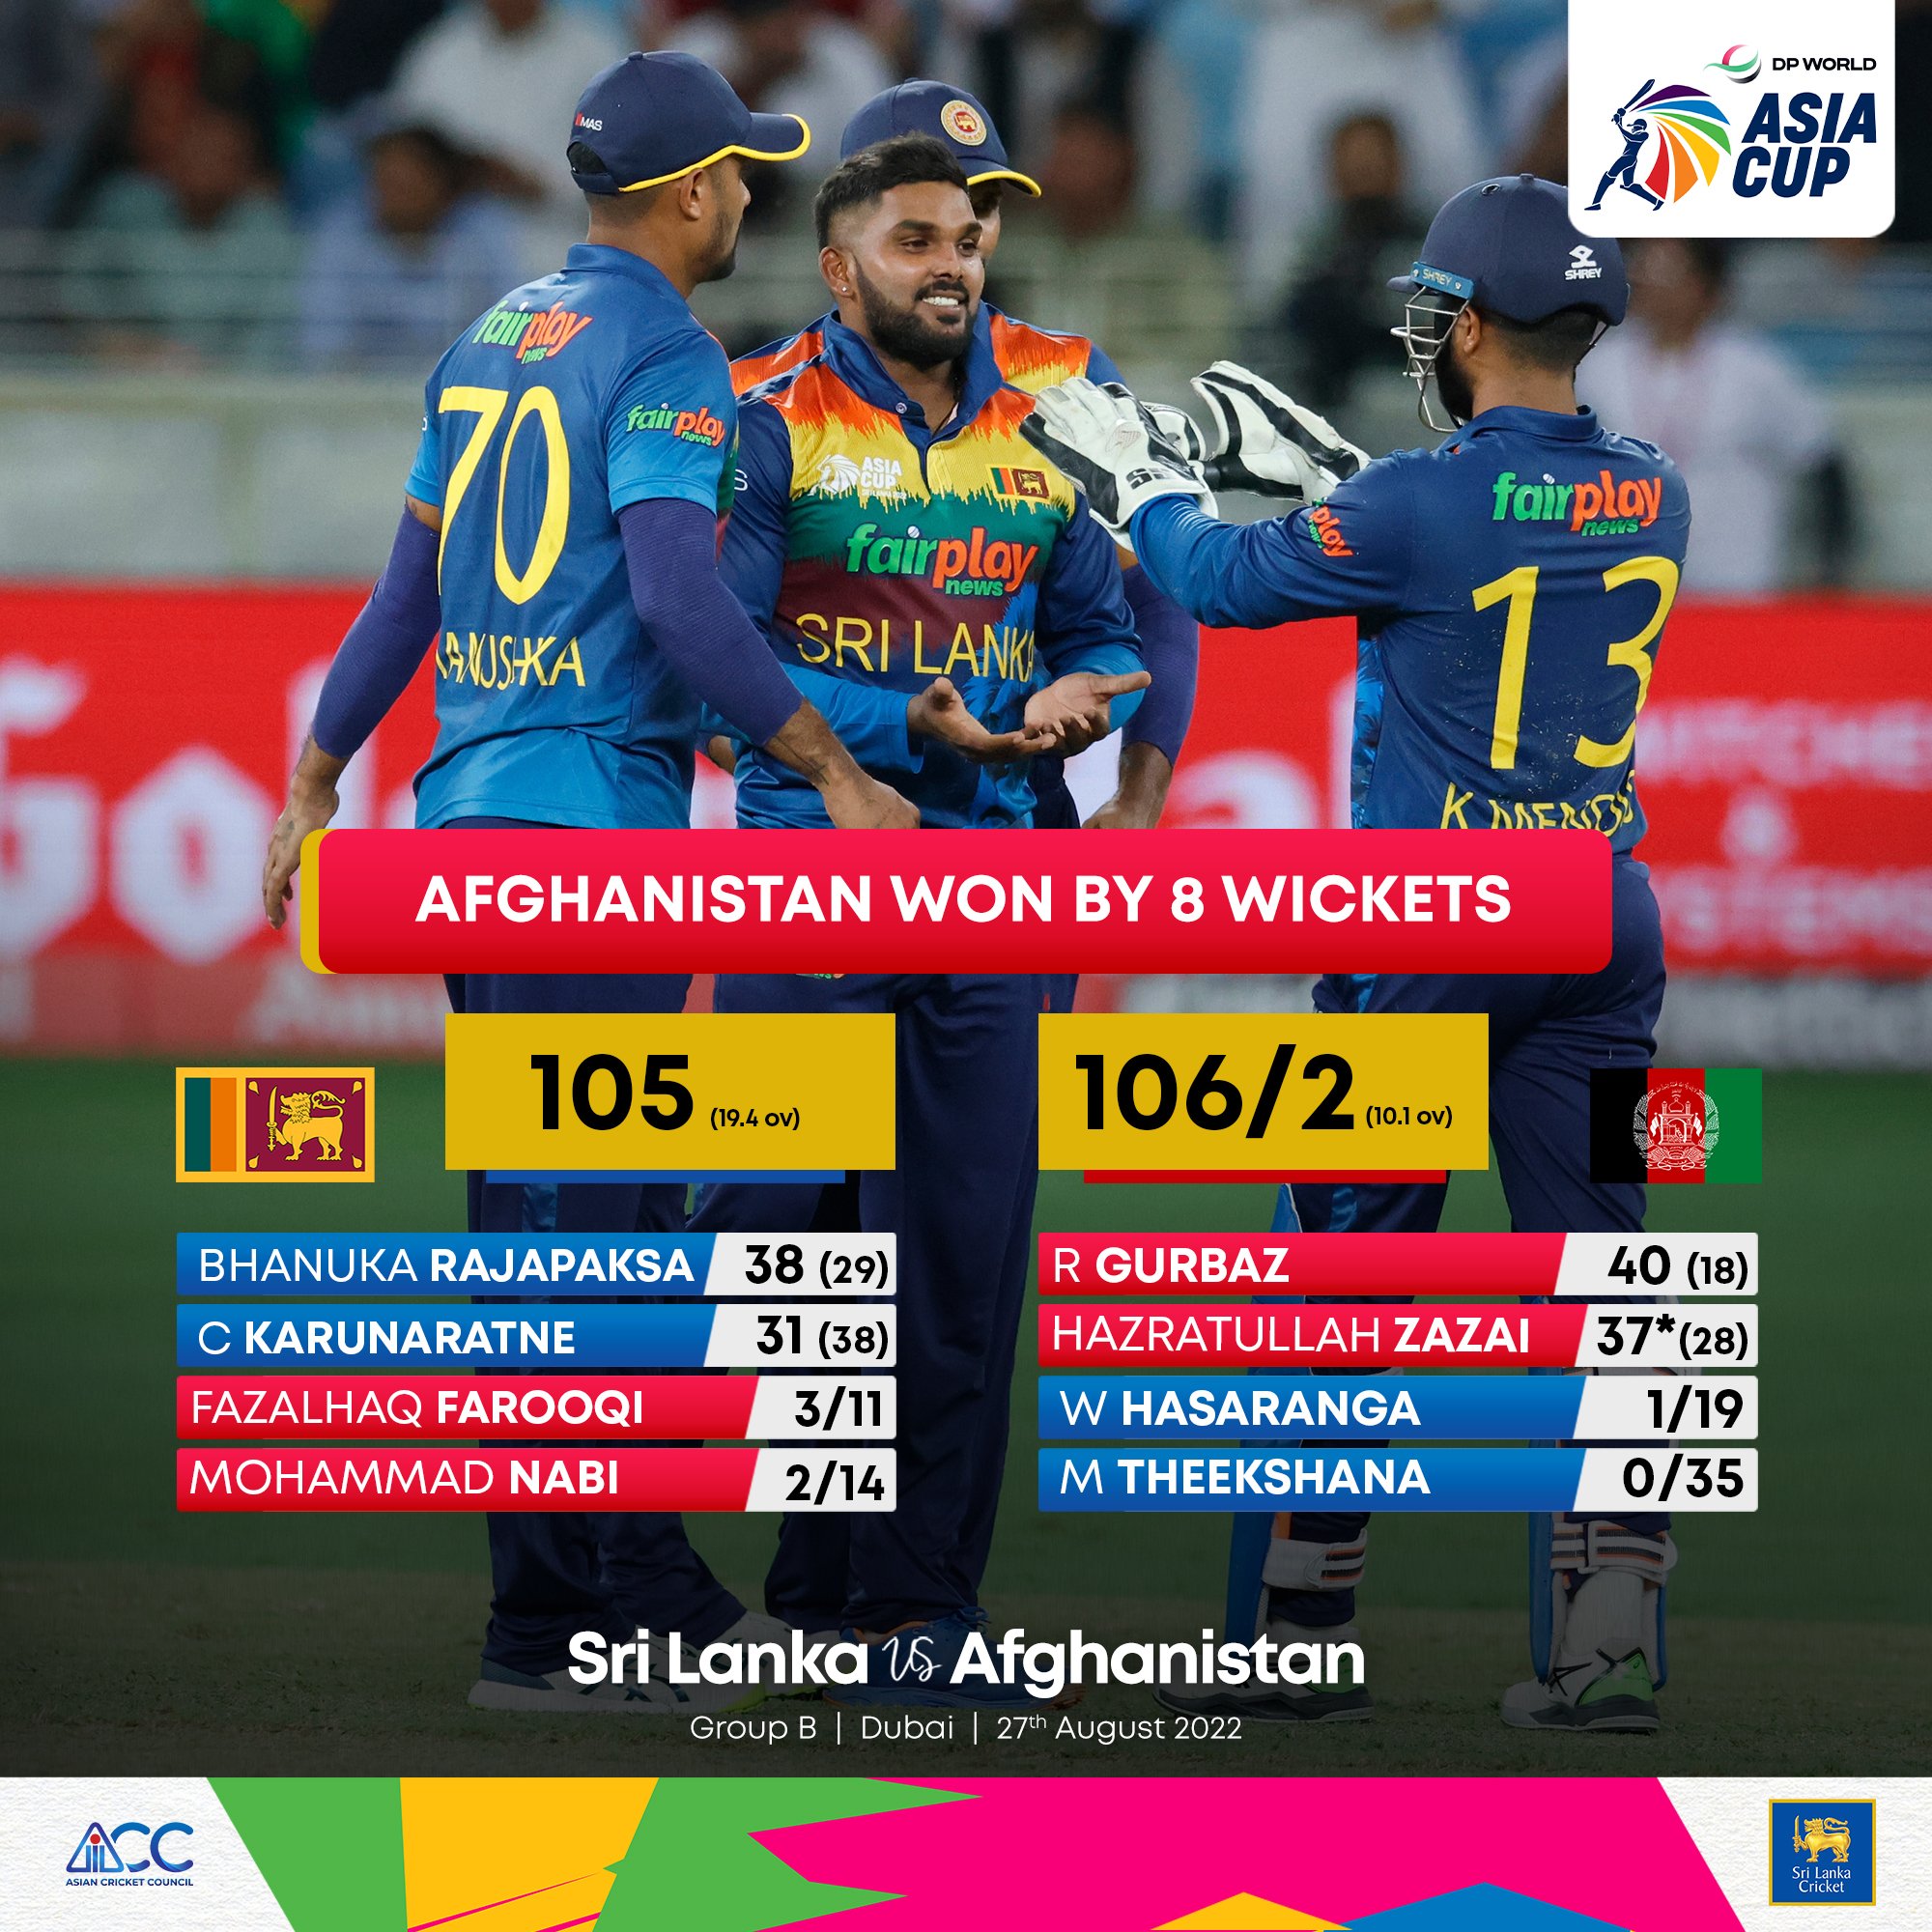 Afghanistan+beat+Sri+Lanka+by+8+wickets+in+Asia+Cup+Opener